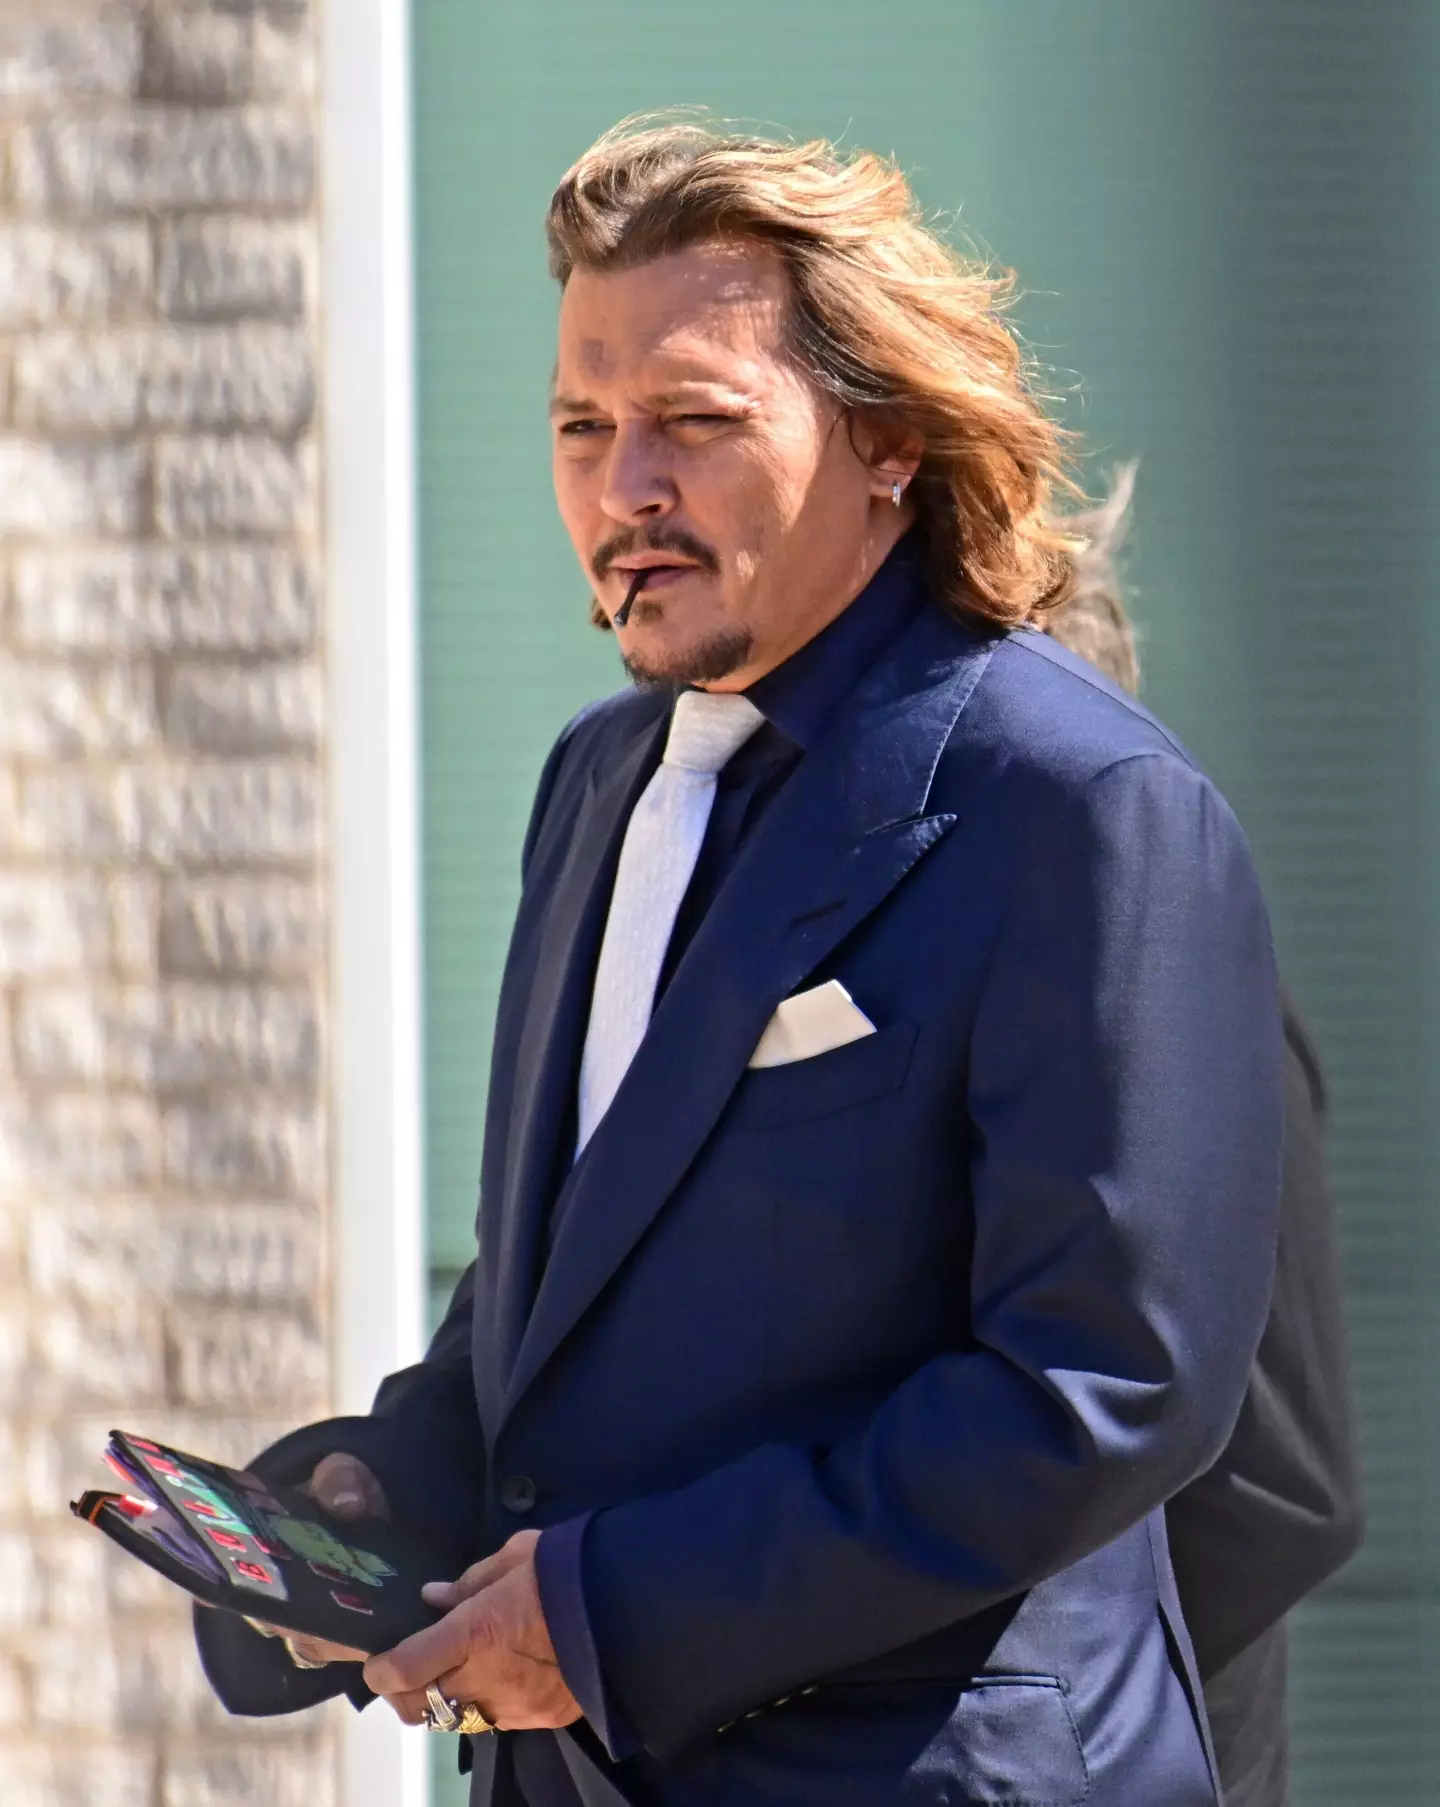 Johny Depp won the defamation trial against his ex-wife Amber Heard earlier this year.